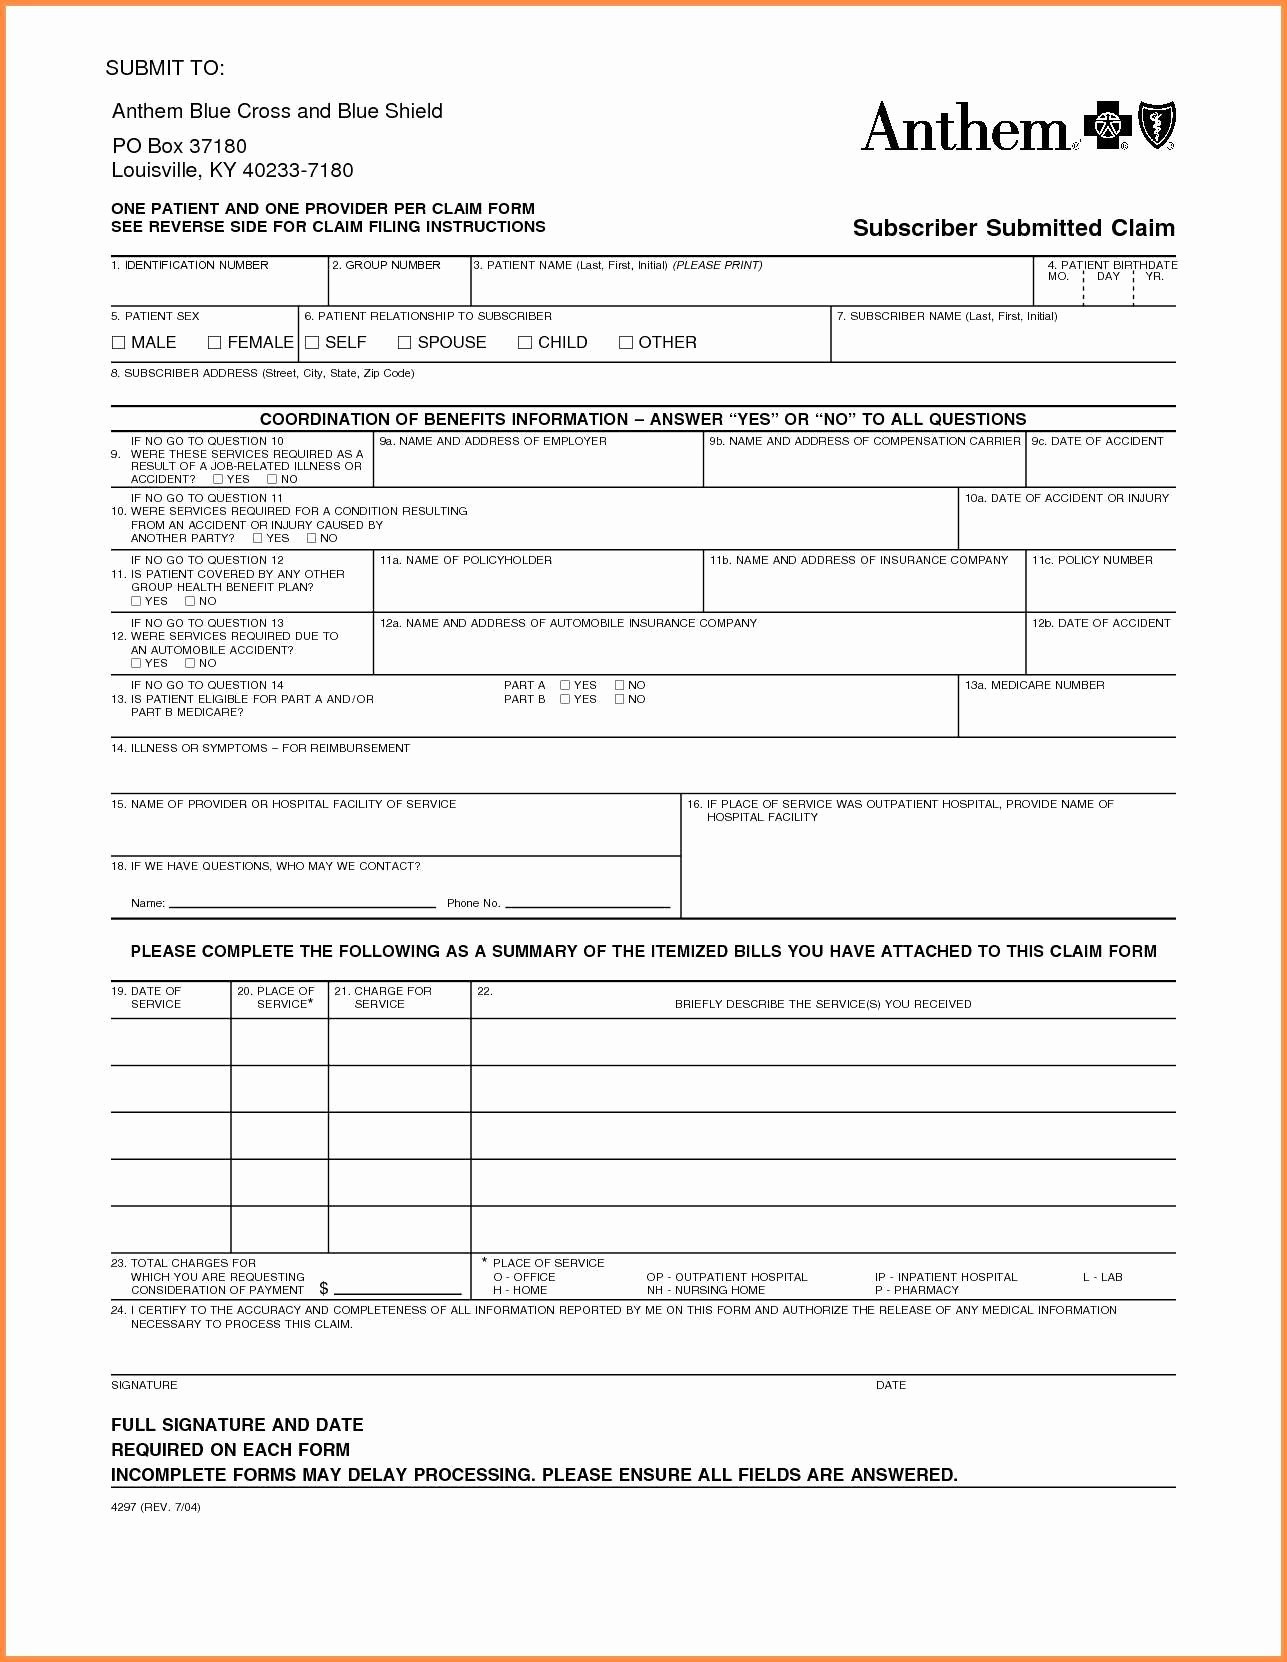 Health Plans Inc Prior Authorization Form Lovely Fillable Auto Document Insurance Id Card